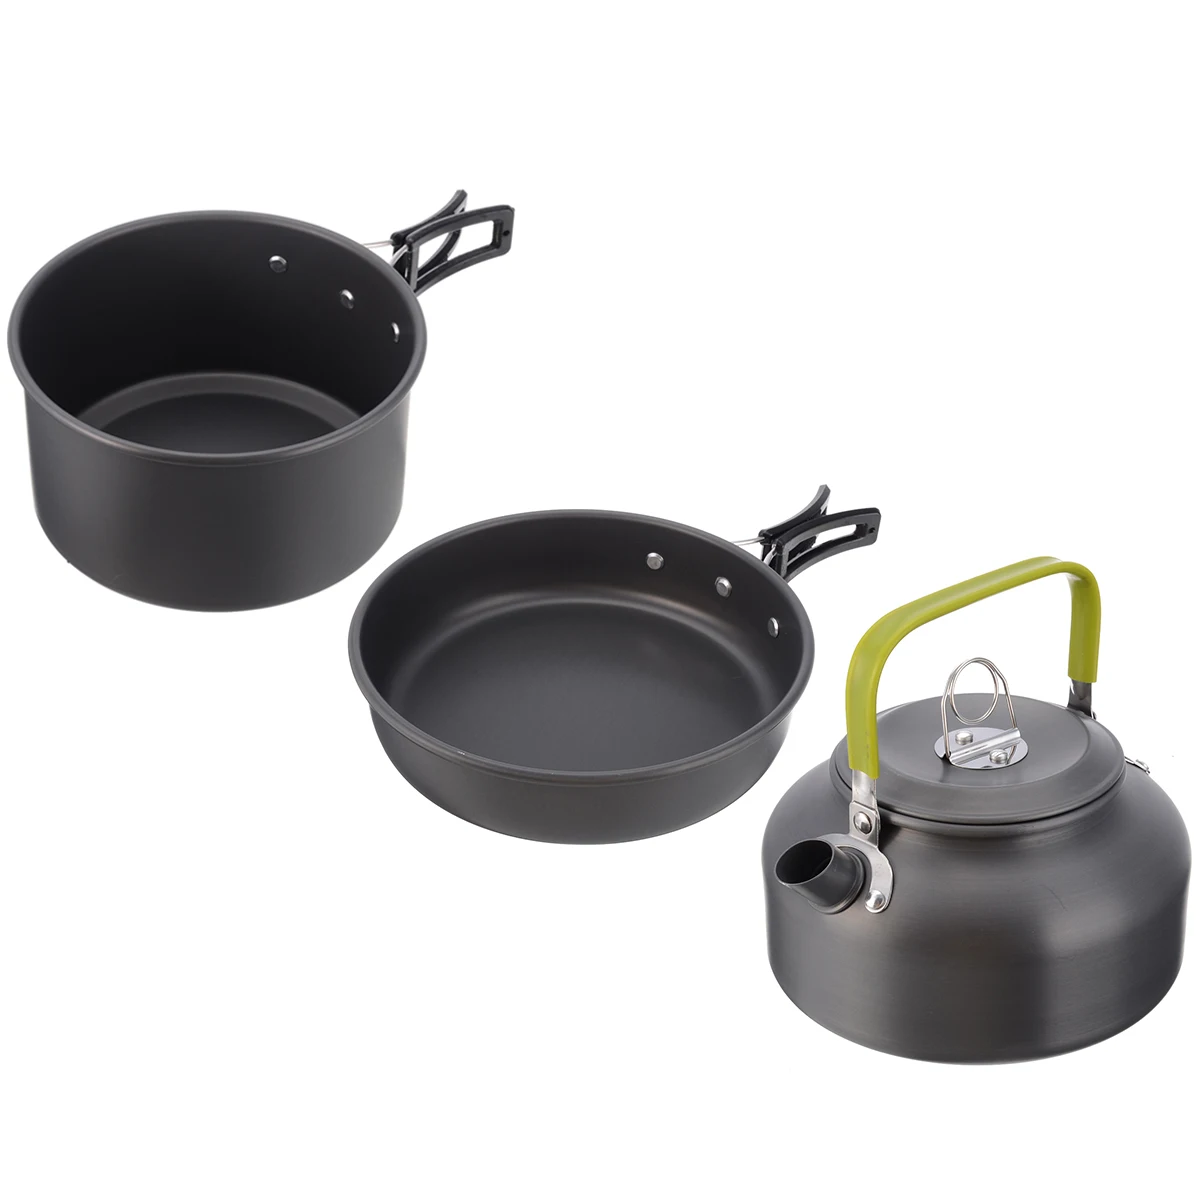 2-3 Person Camping Cookware Cooking Pots Frying Pan Set + Kettle  Outdoor Tableware Cookware Tools For Travel Hiking